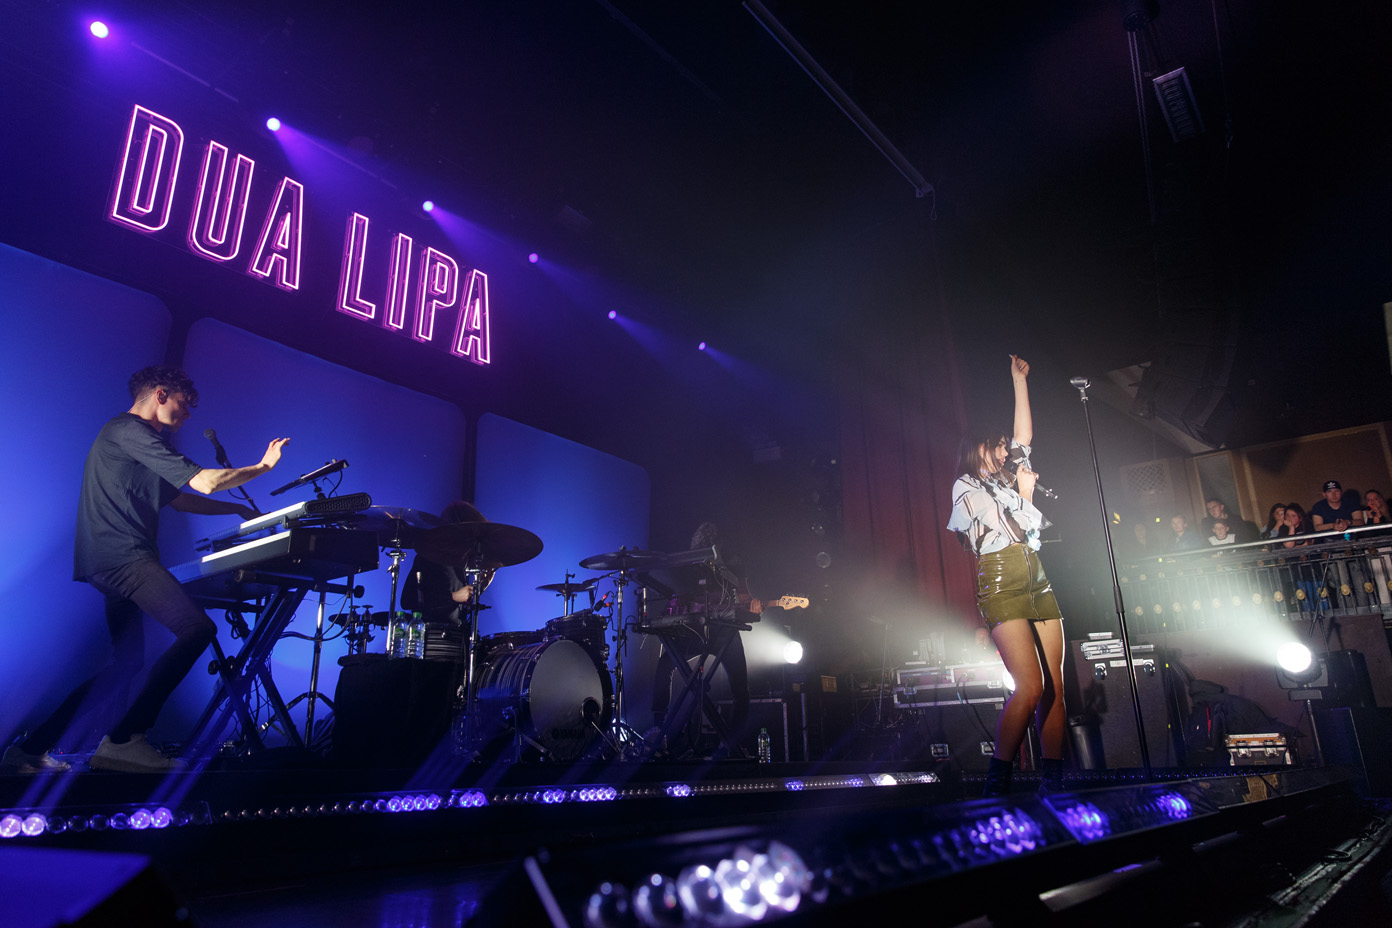 Dua Lipa on stage at the O2 Ritz Manchester on 12 April 2017. Photo: Katy